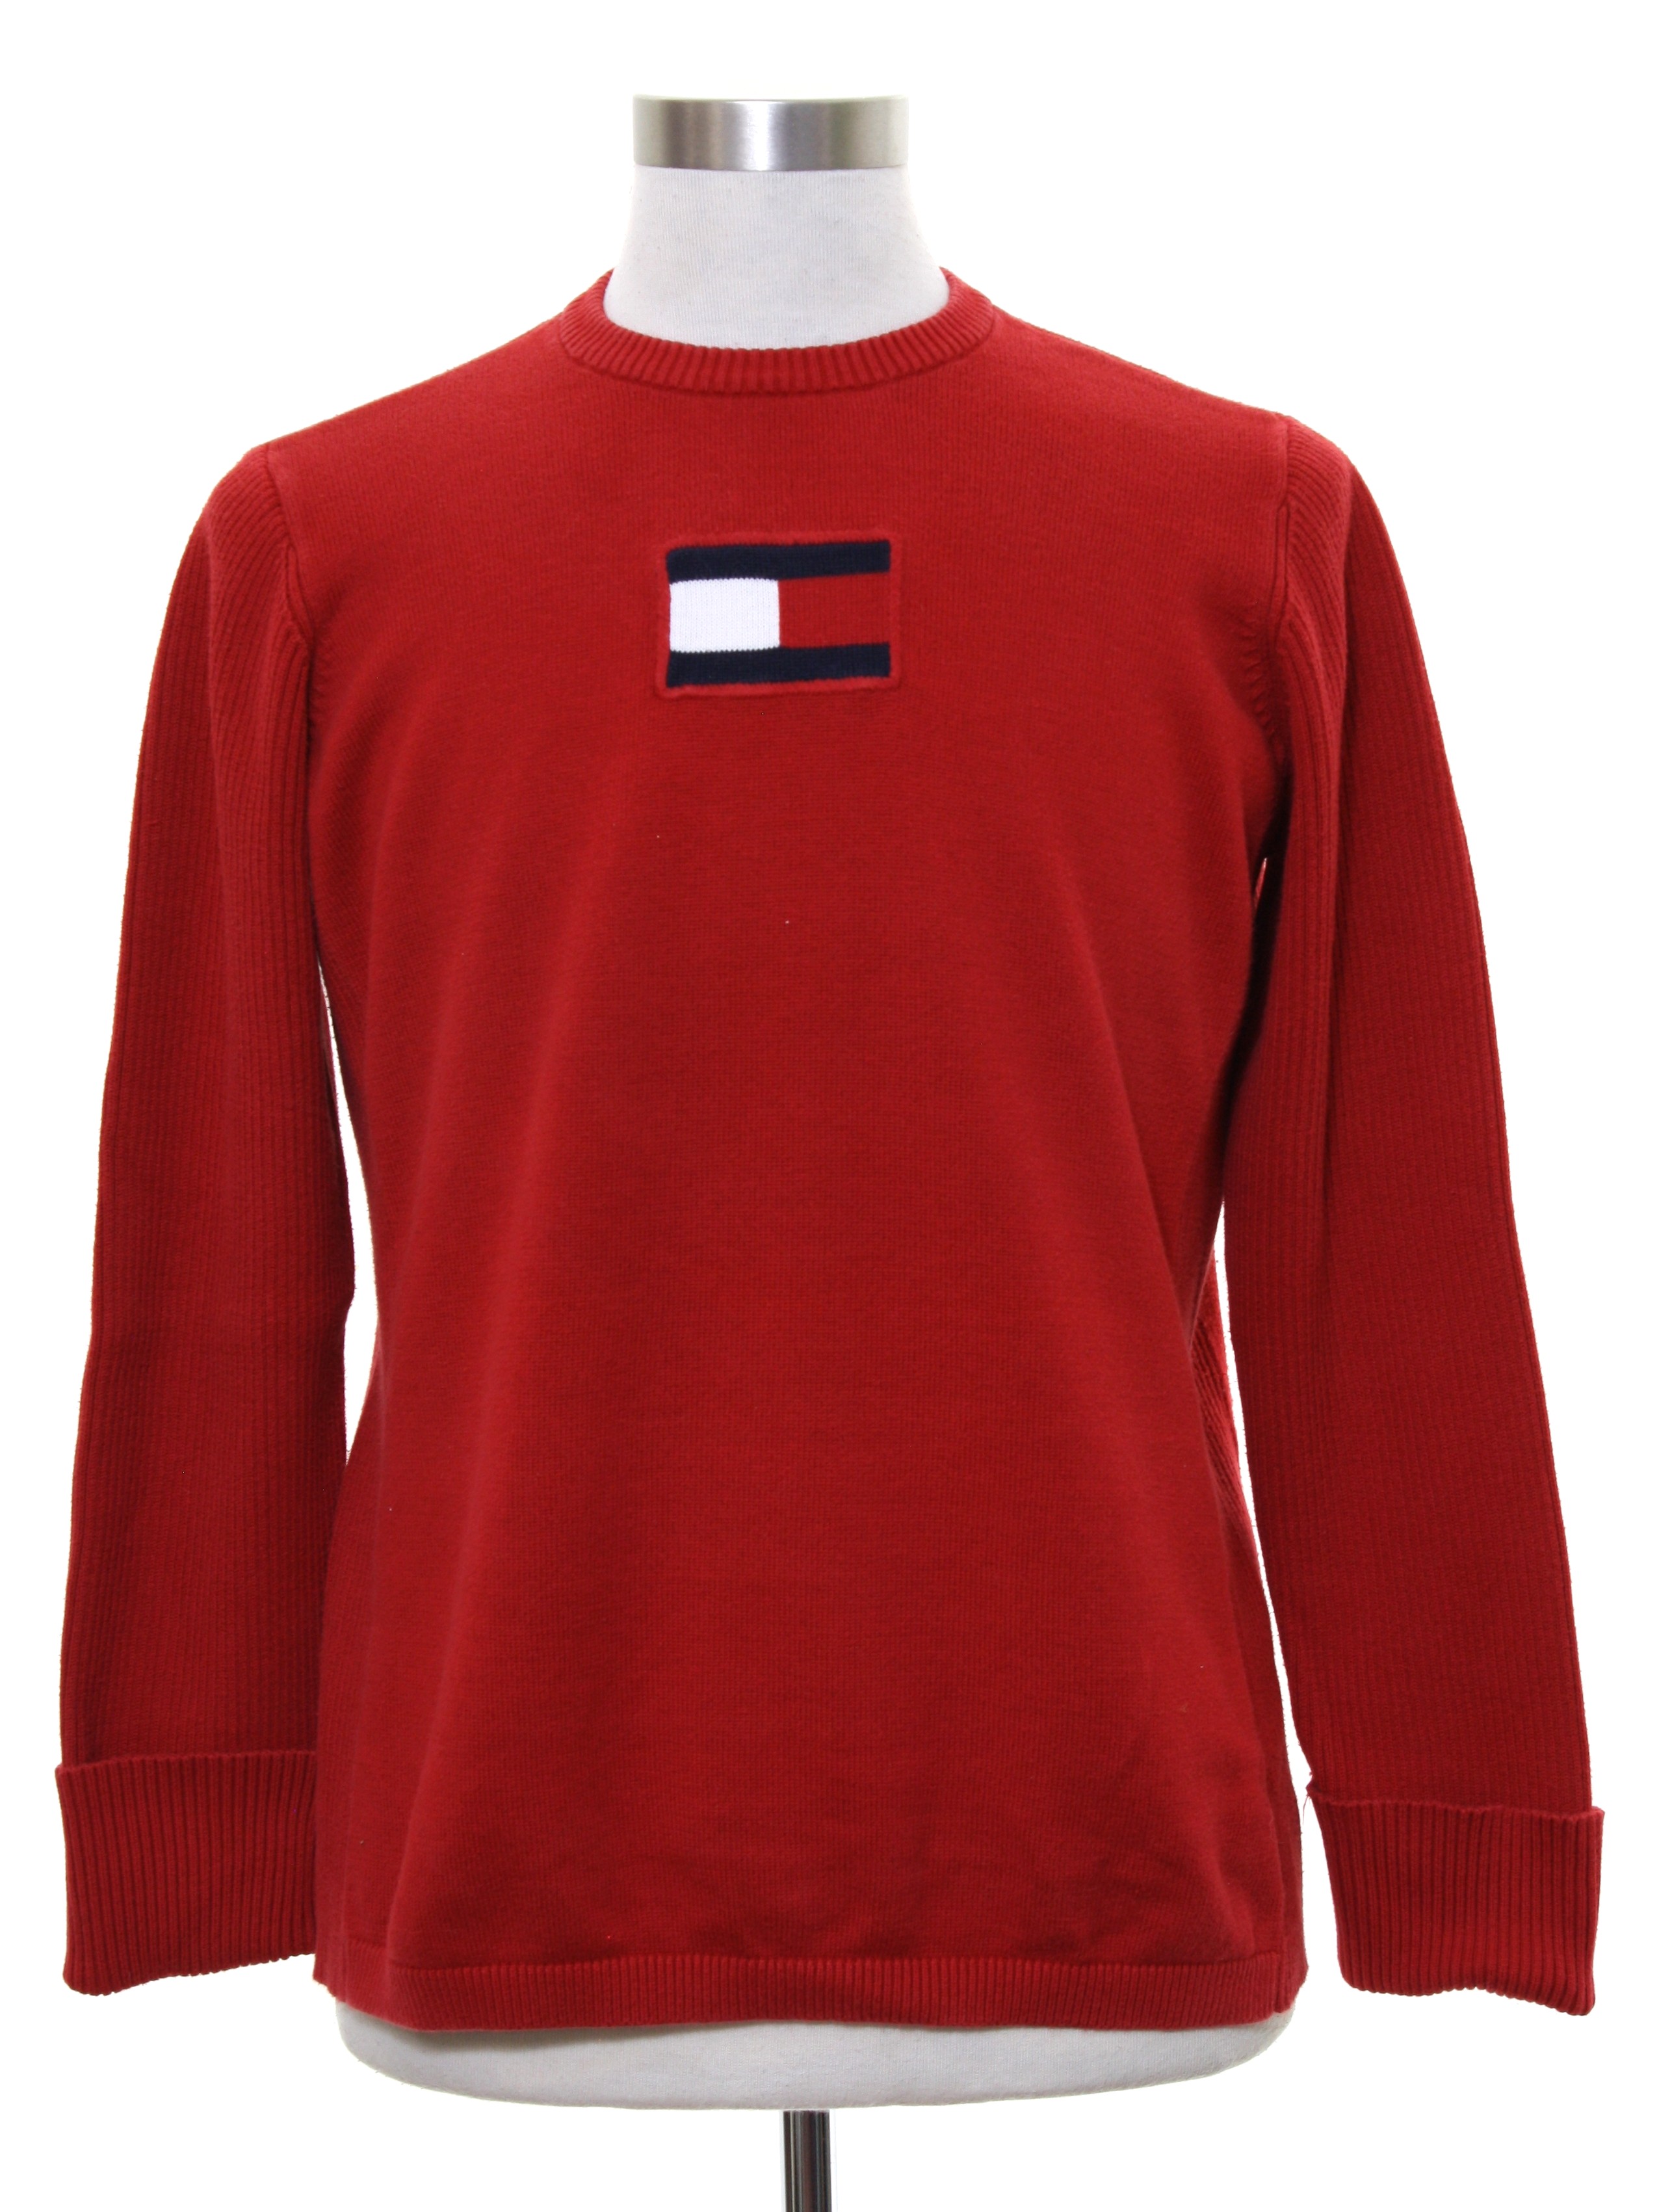 Tommy Hilfiger 90's Vintage Sweater: 90s -Tommy Hilfiger- Womens cranberry red cotton knit ribbed knit cuff longsleeve pullover sweater. Solid color with ribbed banding down the sides and sleeves, a blue,